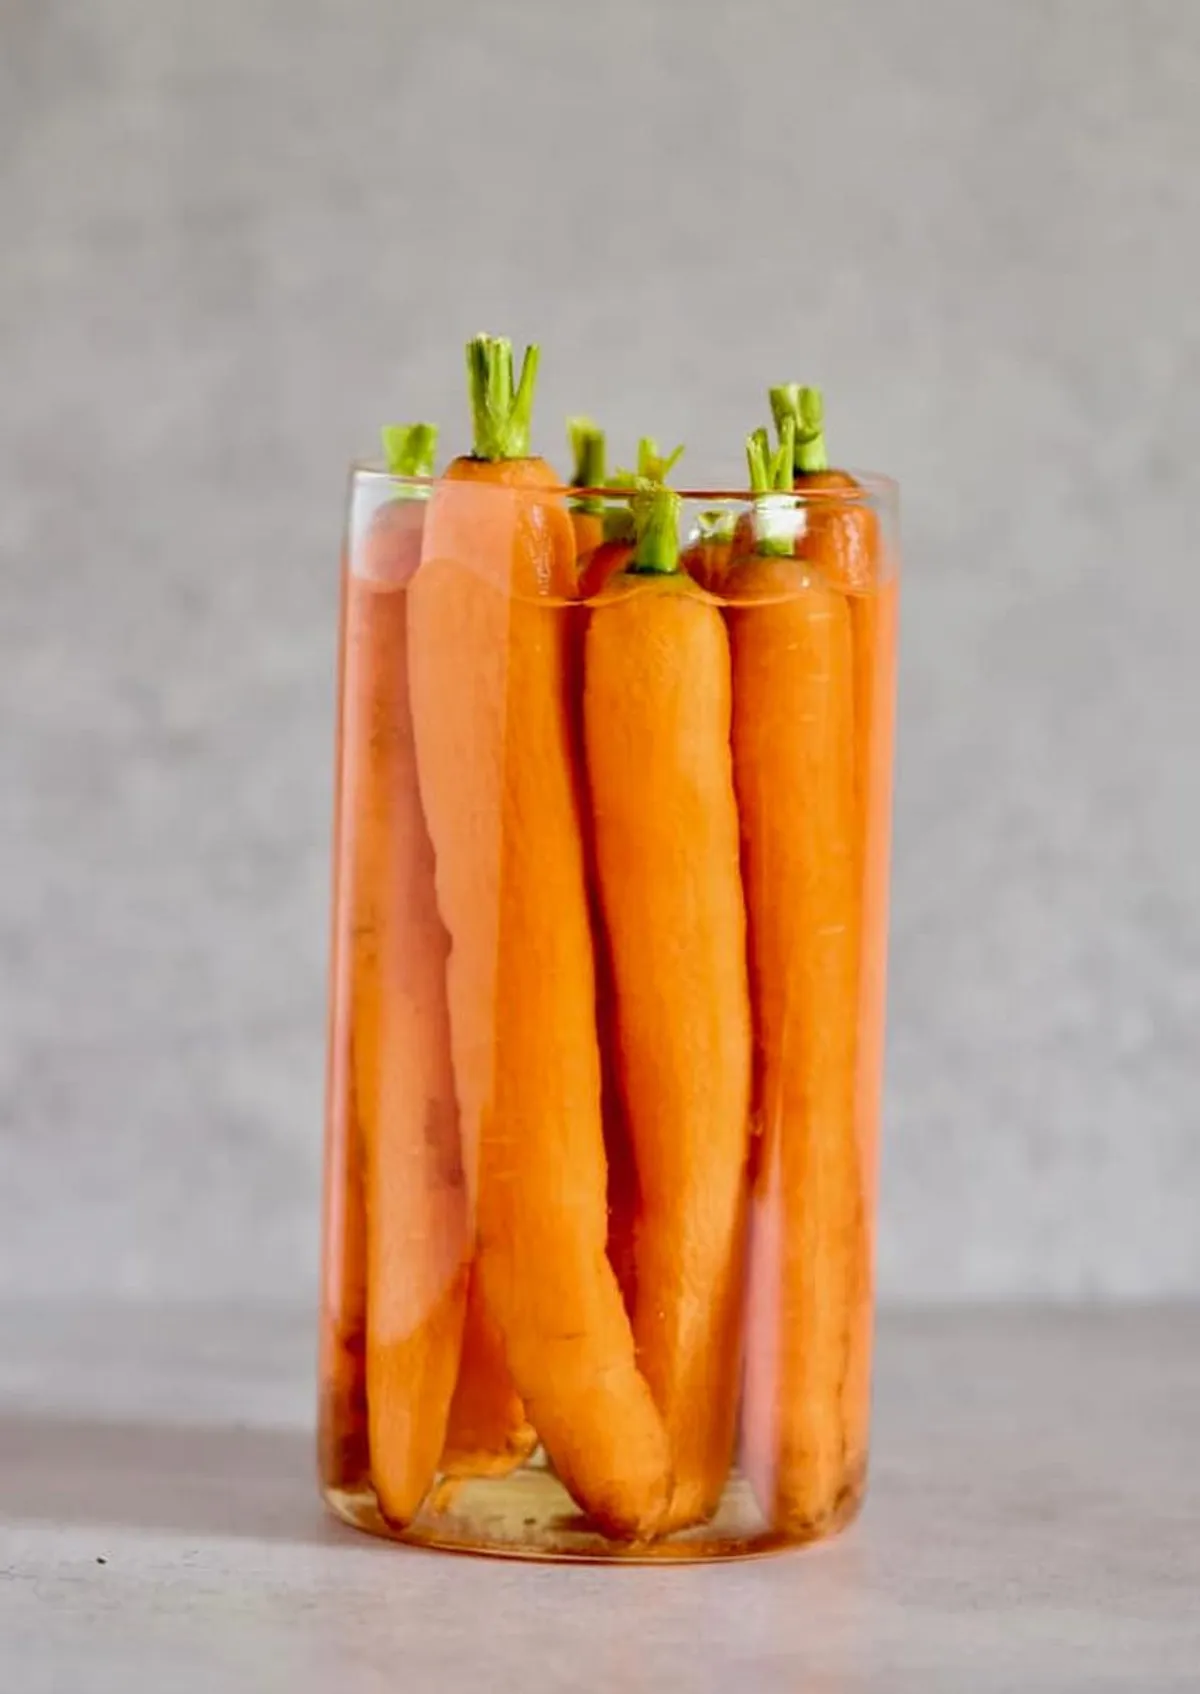 The Best Way to Store Carrots